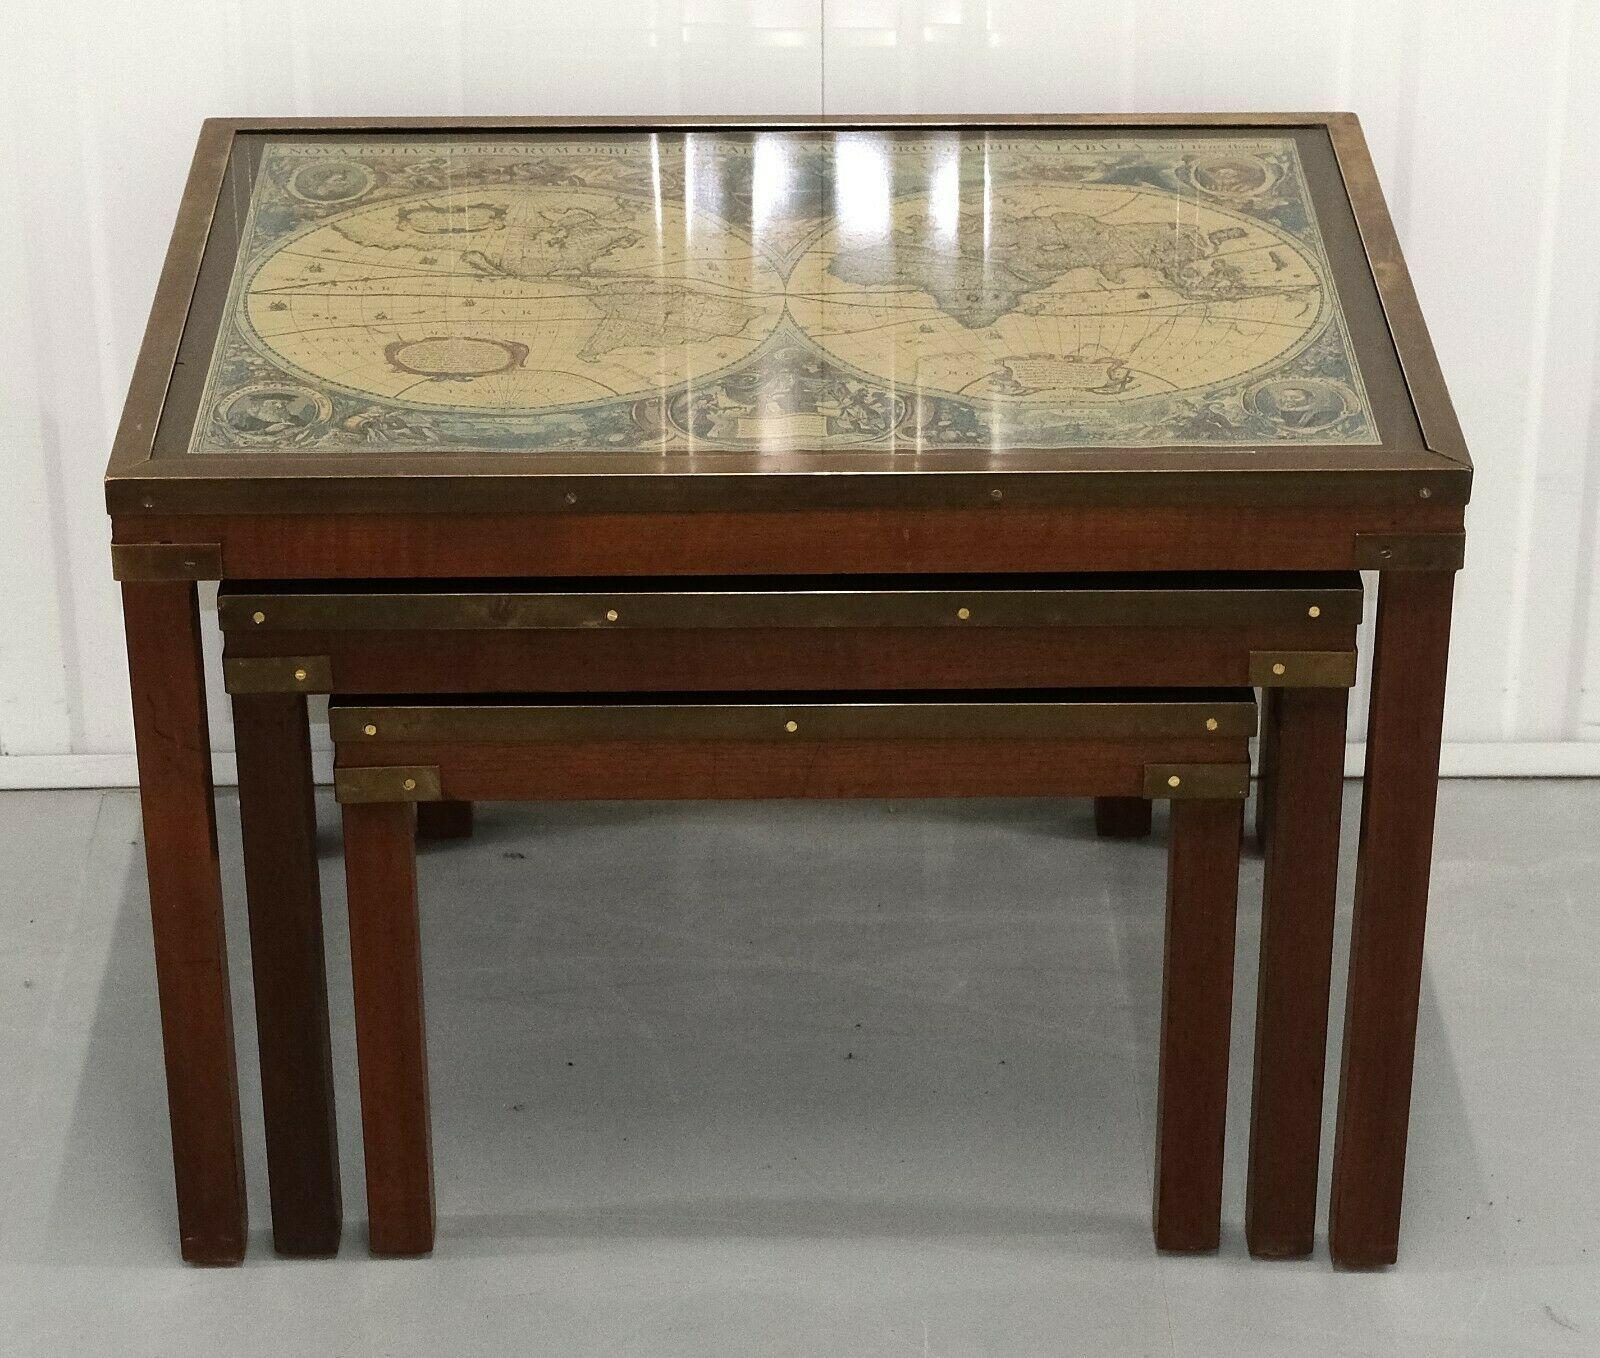 We are delighted to offer for sale this elegant Military Campaign mahogany nest of tables with world maps.

This is a very good looking, solid and decorative nest of tables with brass fitting and fixtures. Each of the tables show a vintage world